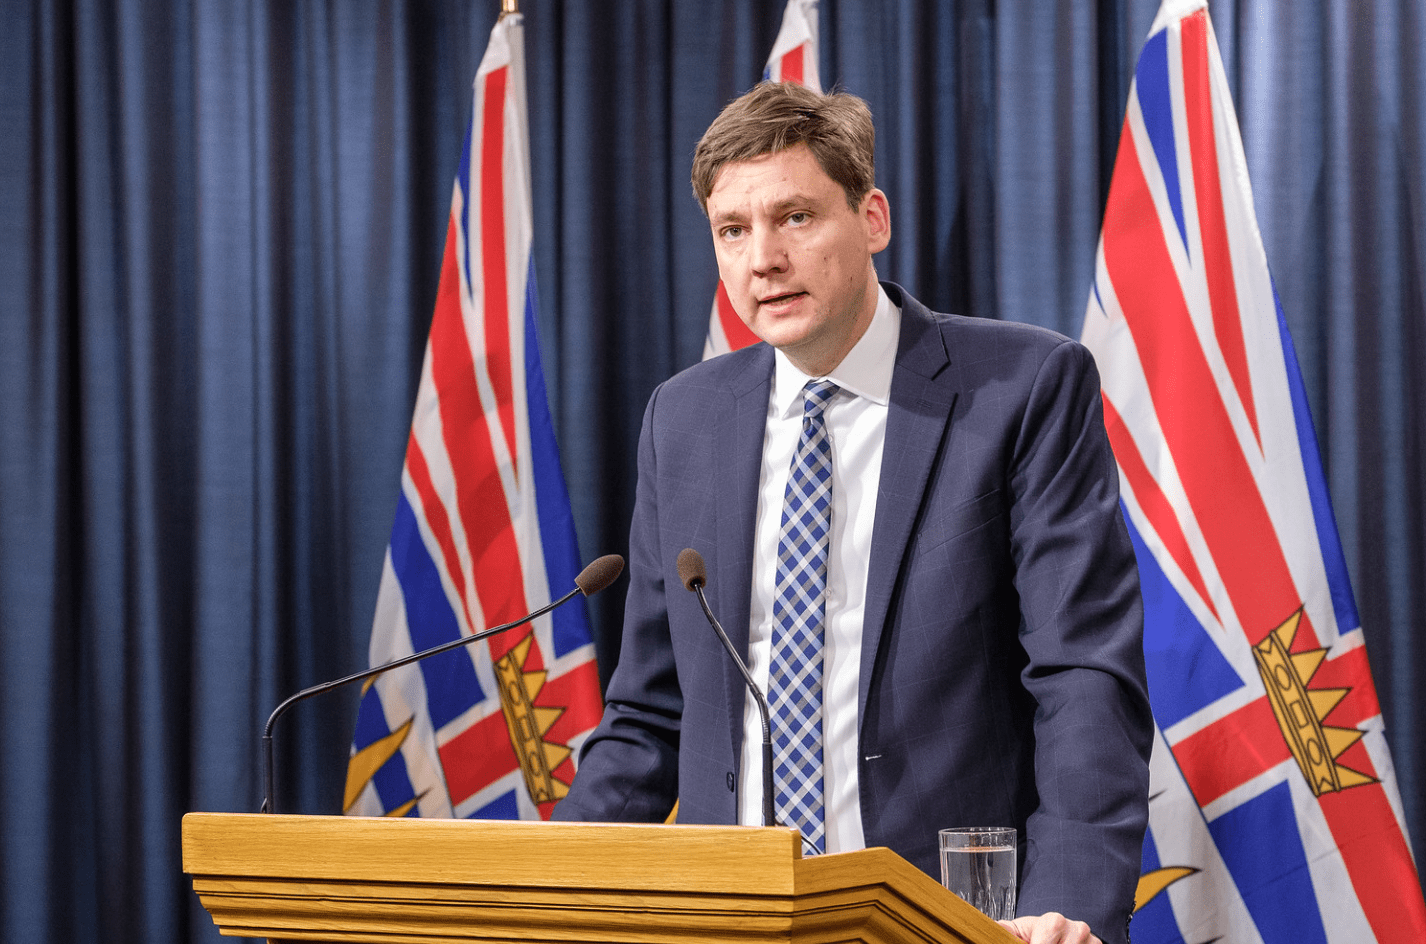 New Premier Eby rearranges provincial cabinet, creates two new ministries